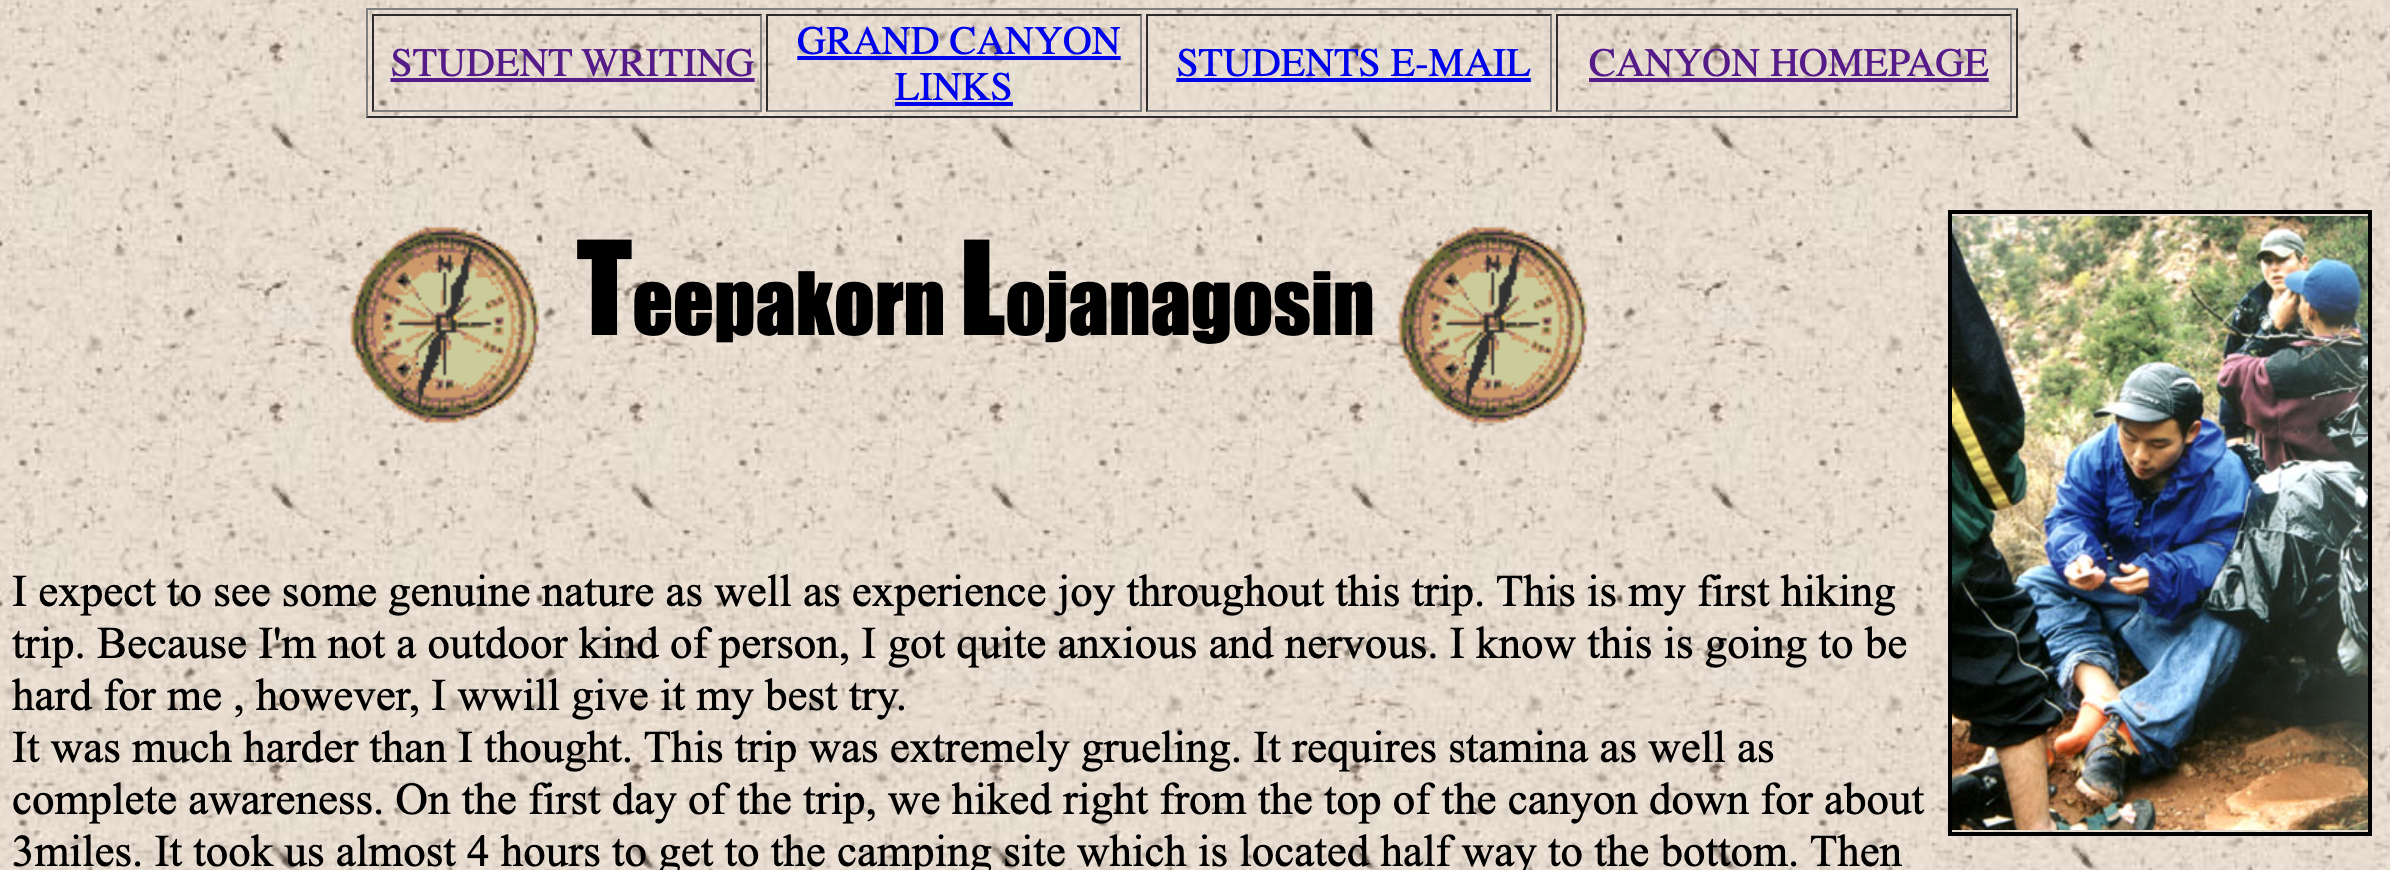 Old website with several links and some brief student writing about trip to the Grand Canyon.